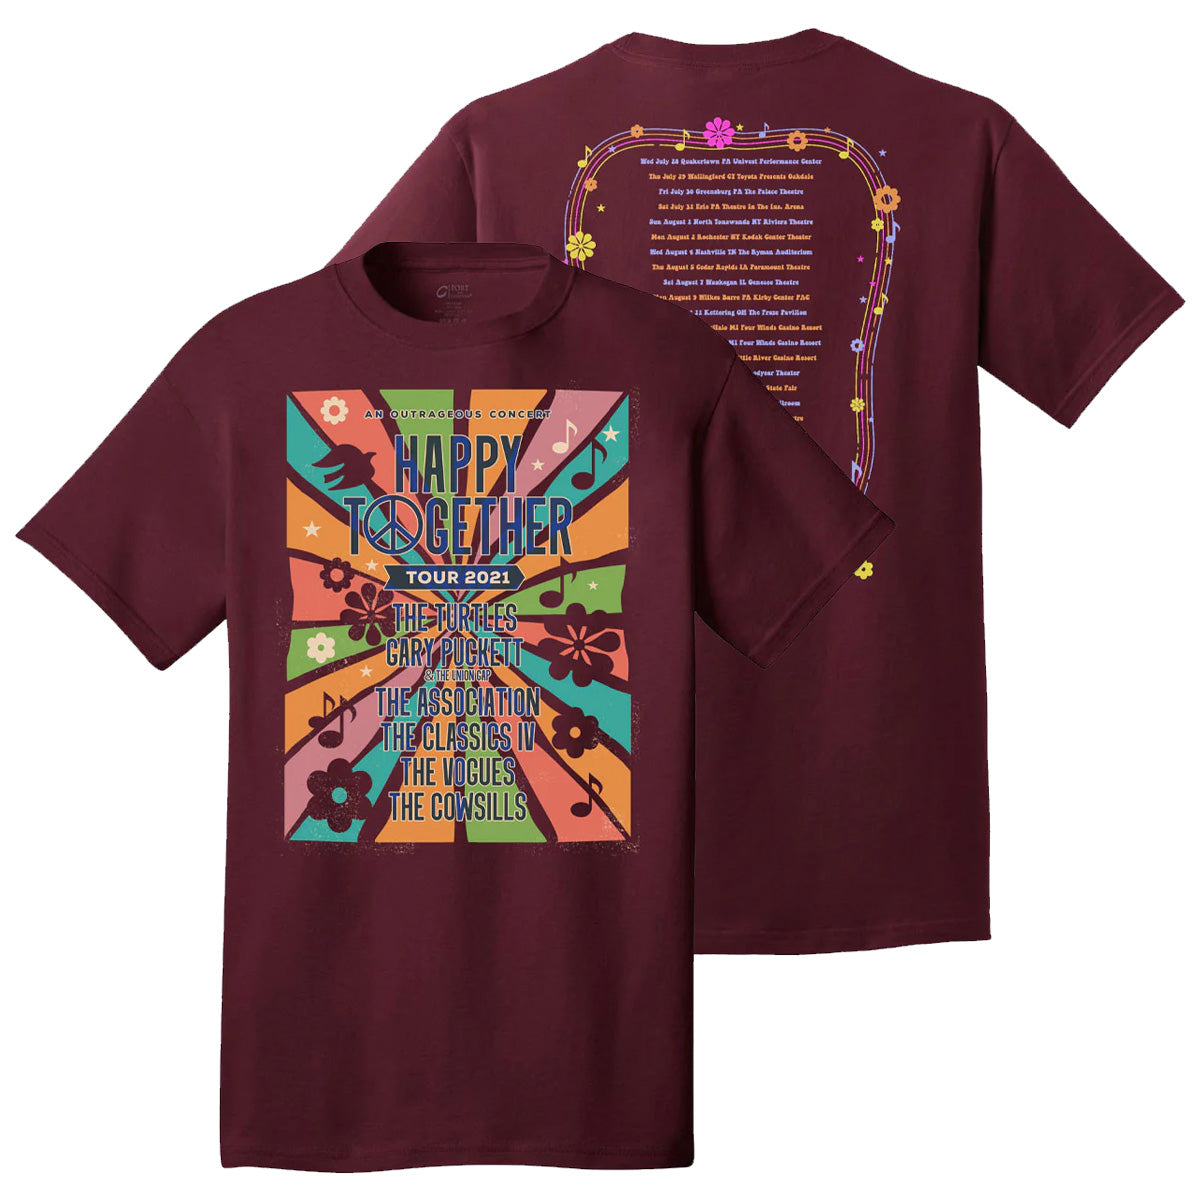 HAPPY TOGETHER Tour 2021 T-Shirt - Maroon